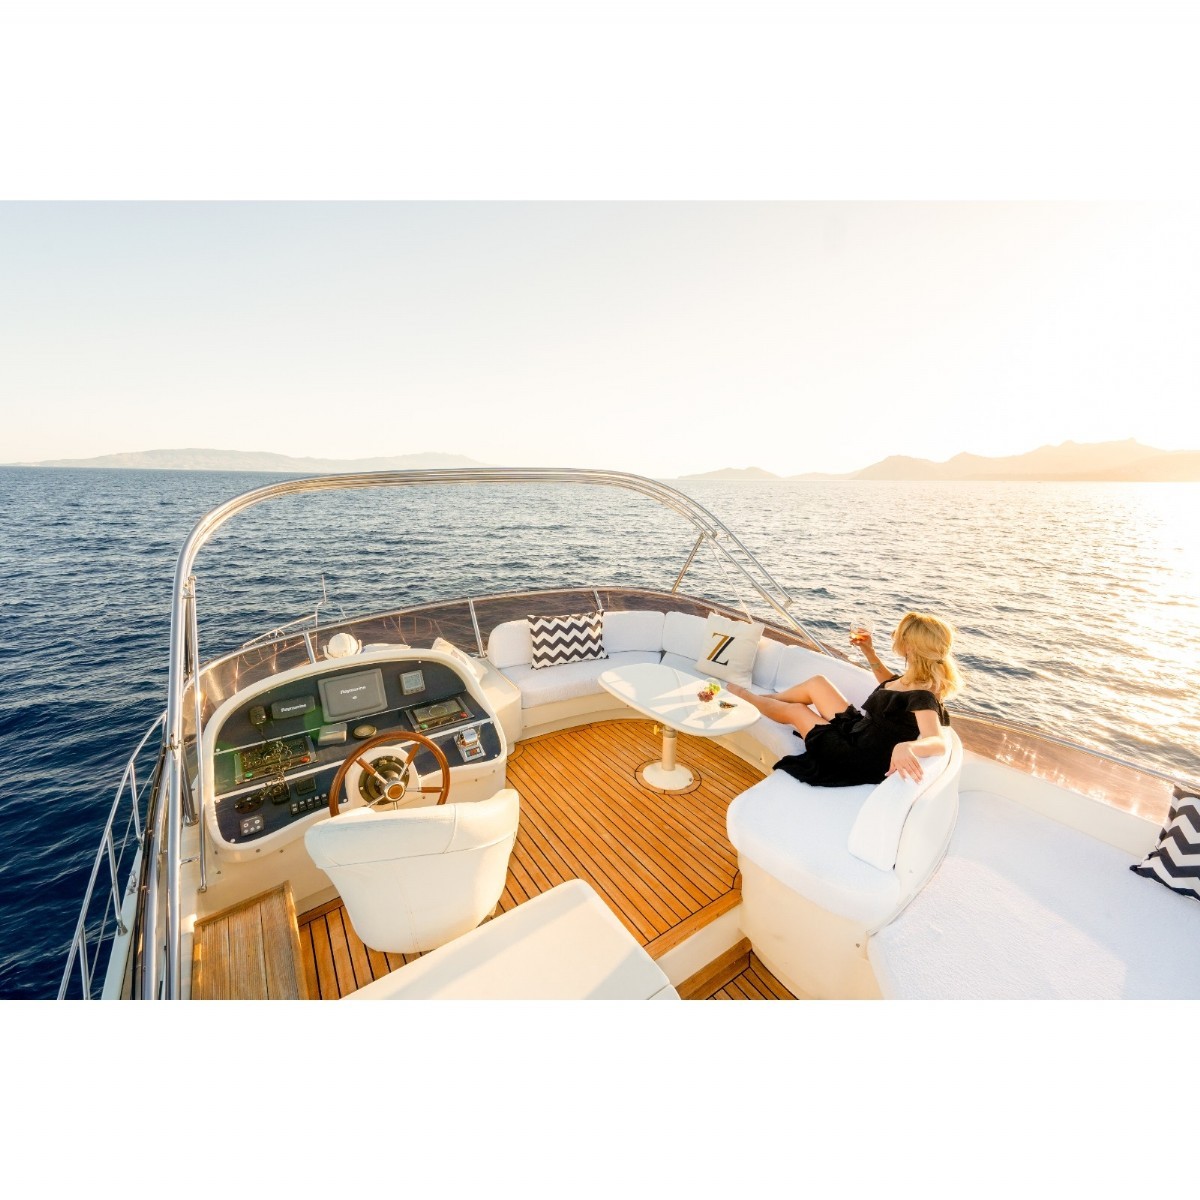 Our Boats | Yacht Charter Turkey M344 Luxury Motoryacht For Rent 6 People | M344  | private motoryacht rental, luxury yacht hire, Yacht charter Turkey, Gulet charter, gulet rental Turkey, yacht rentals Turkey, luxury boat charter Turkey, Bodrum motoryacht charter, rental motoryacht bodrum, luxury motoryacht, Zeynep Lina | 